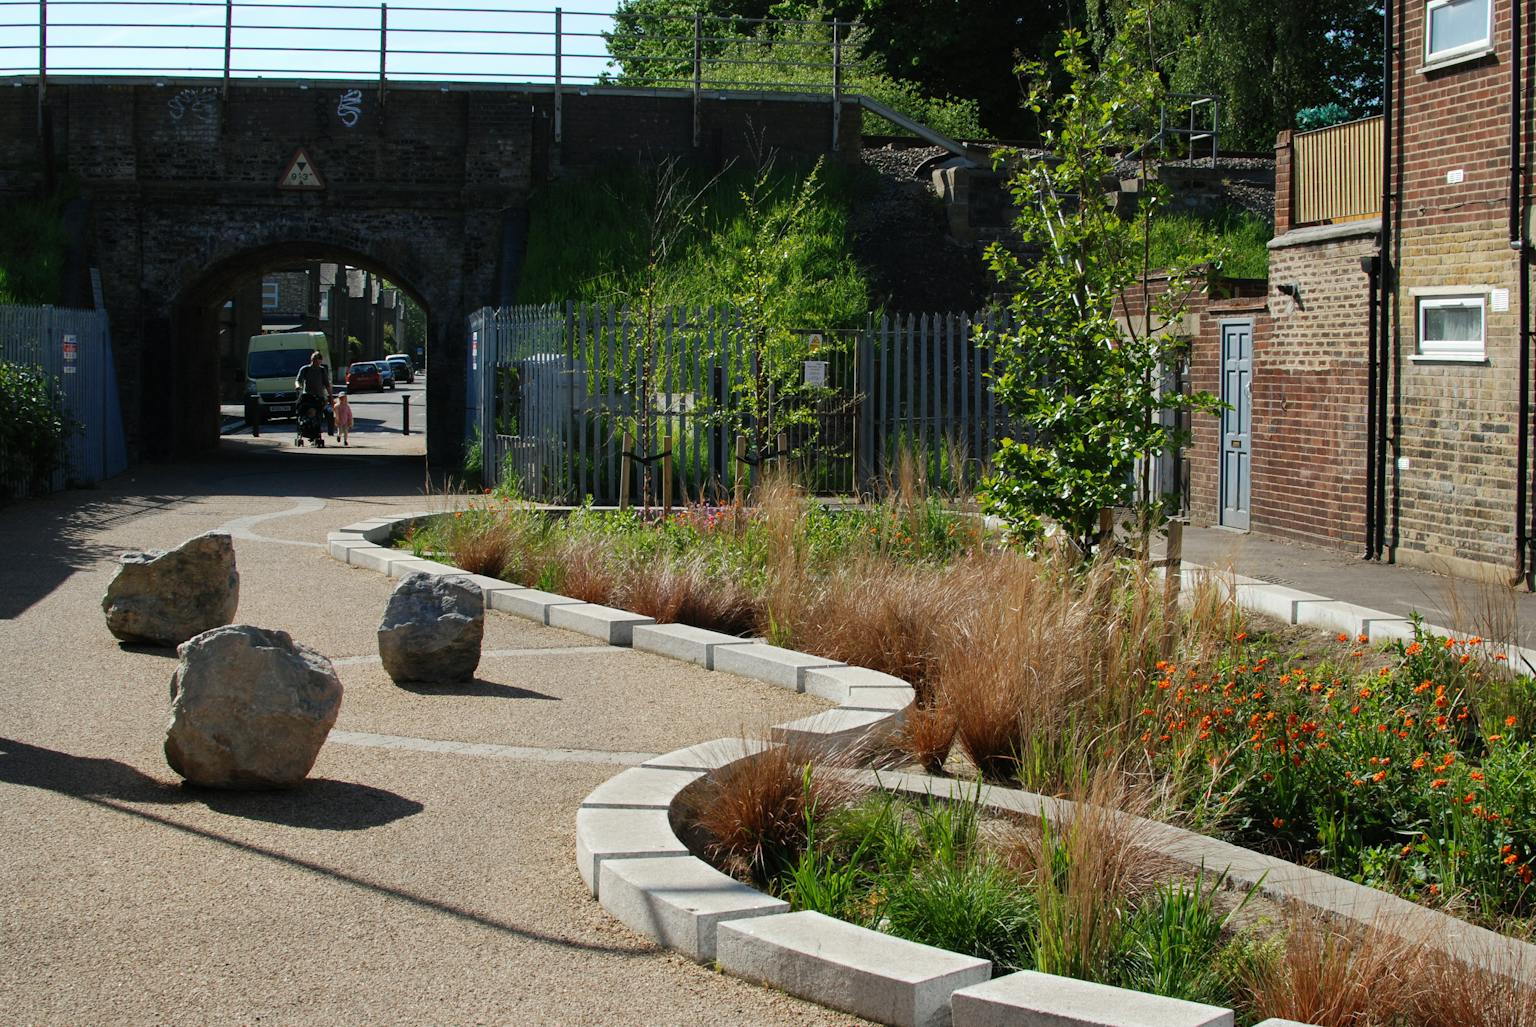 Cycle path with planting